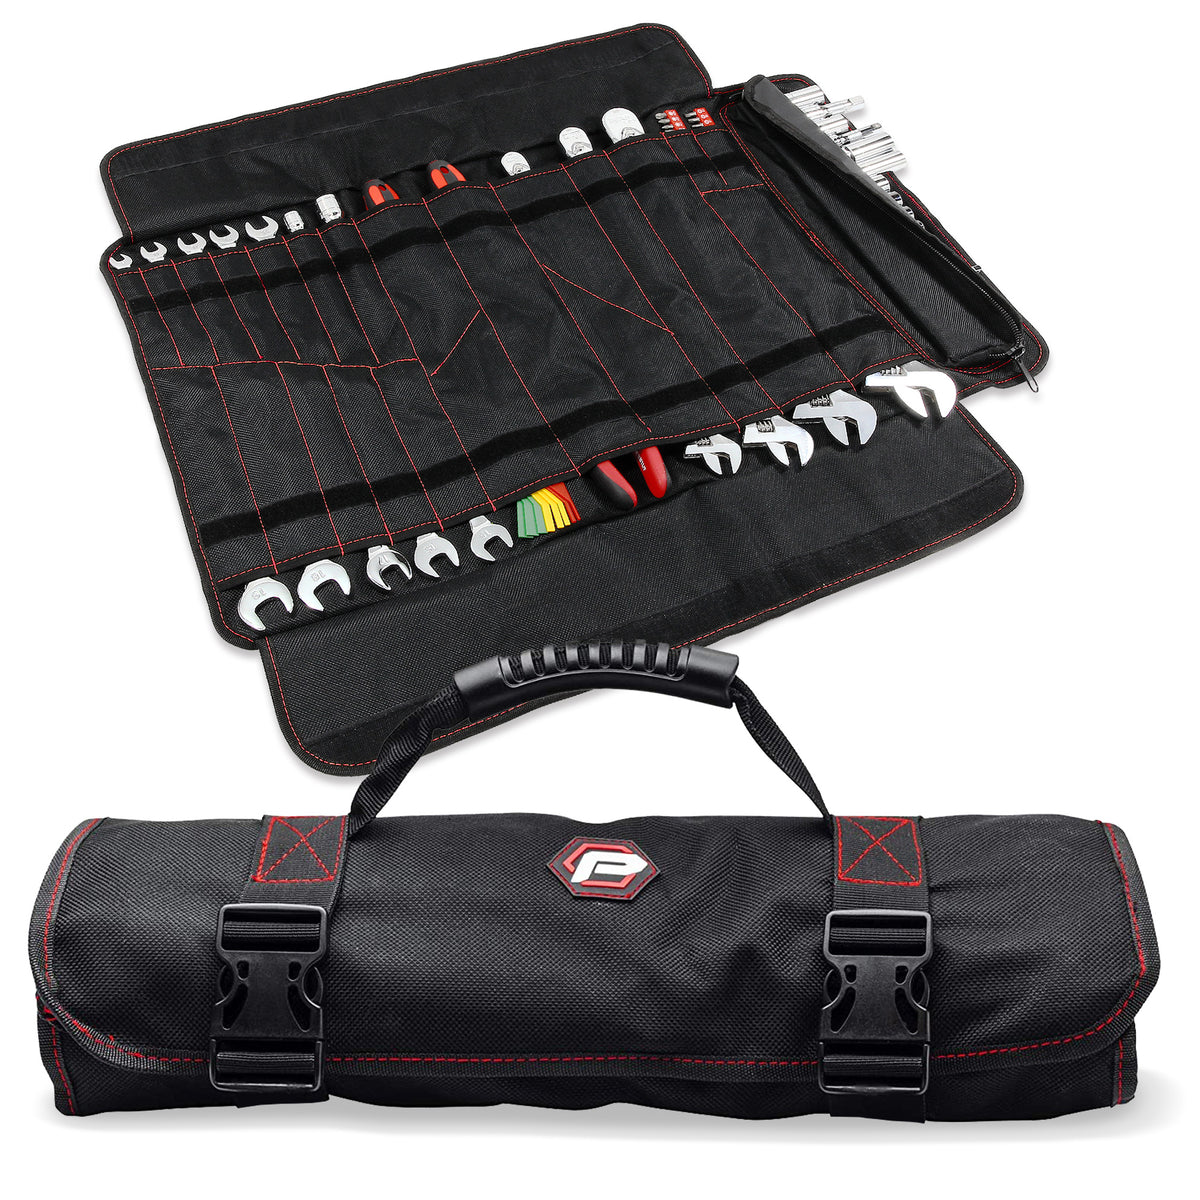 Tool Roll Up Pouch, Portable Tool Bag Hard Wearing Multi Pockets